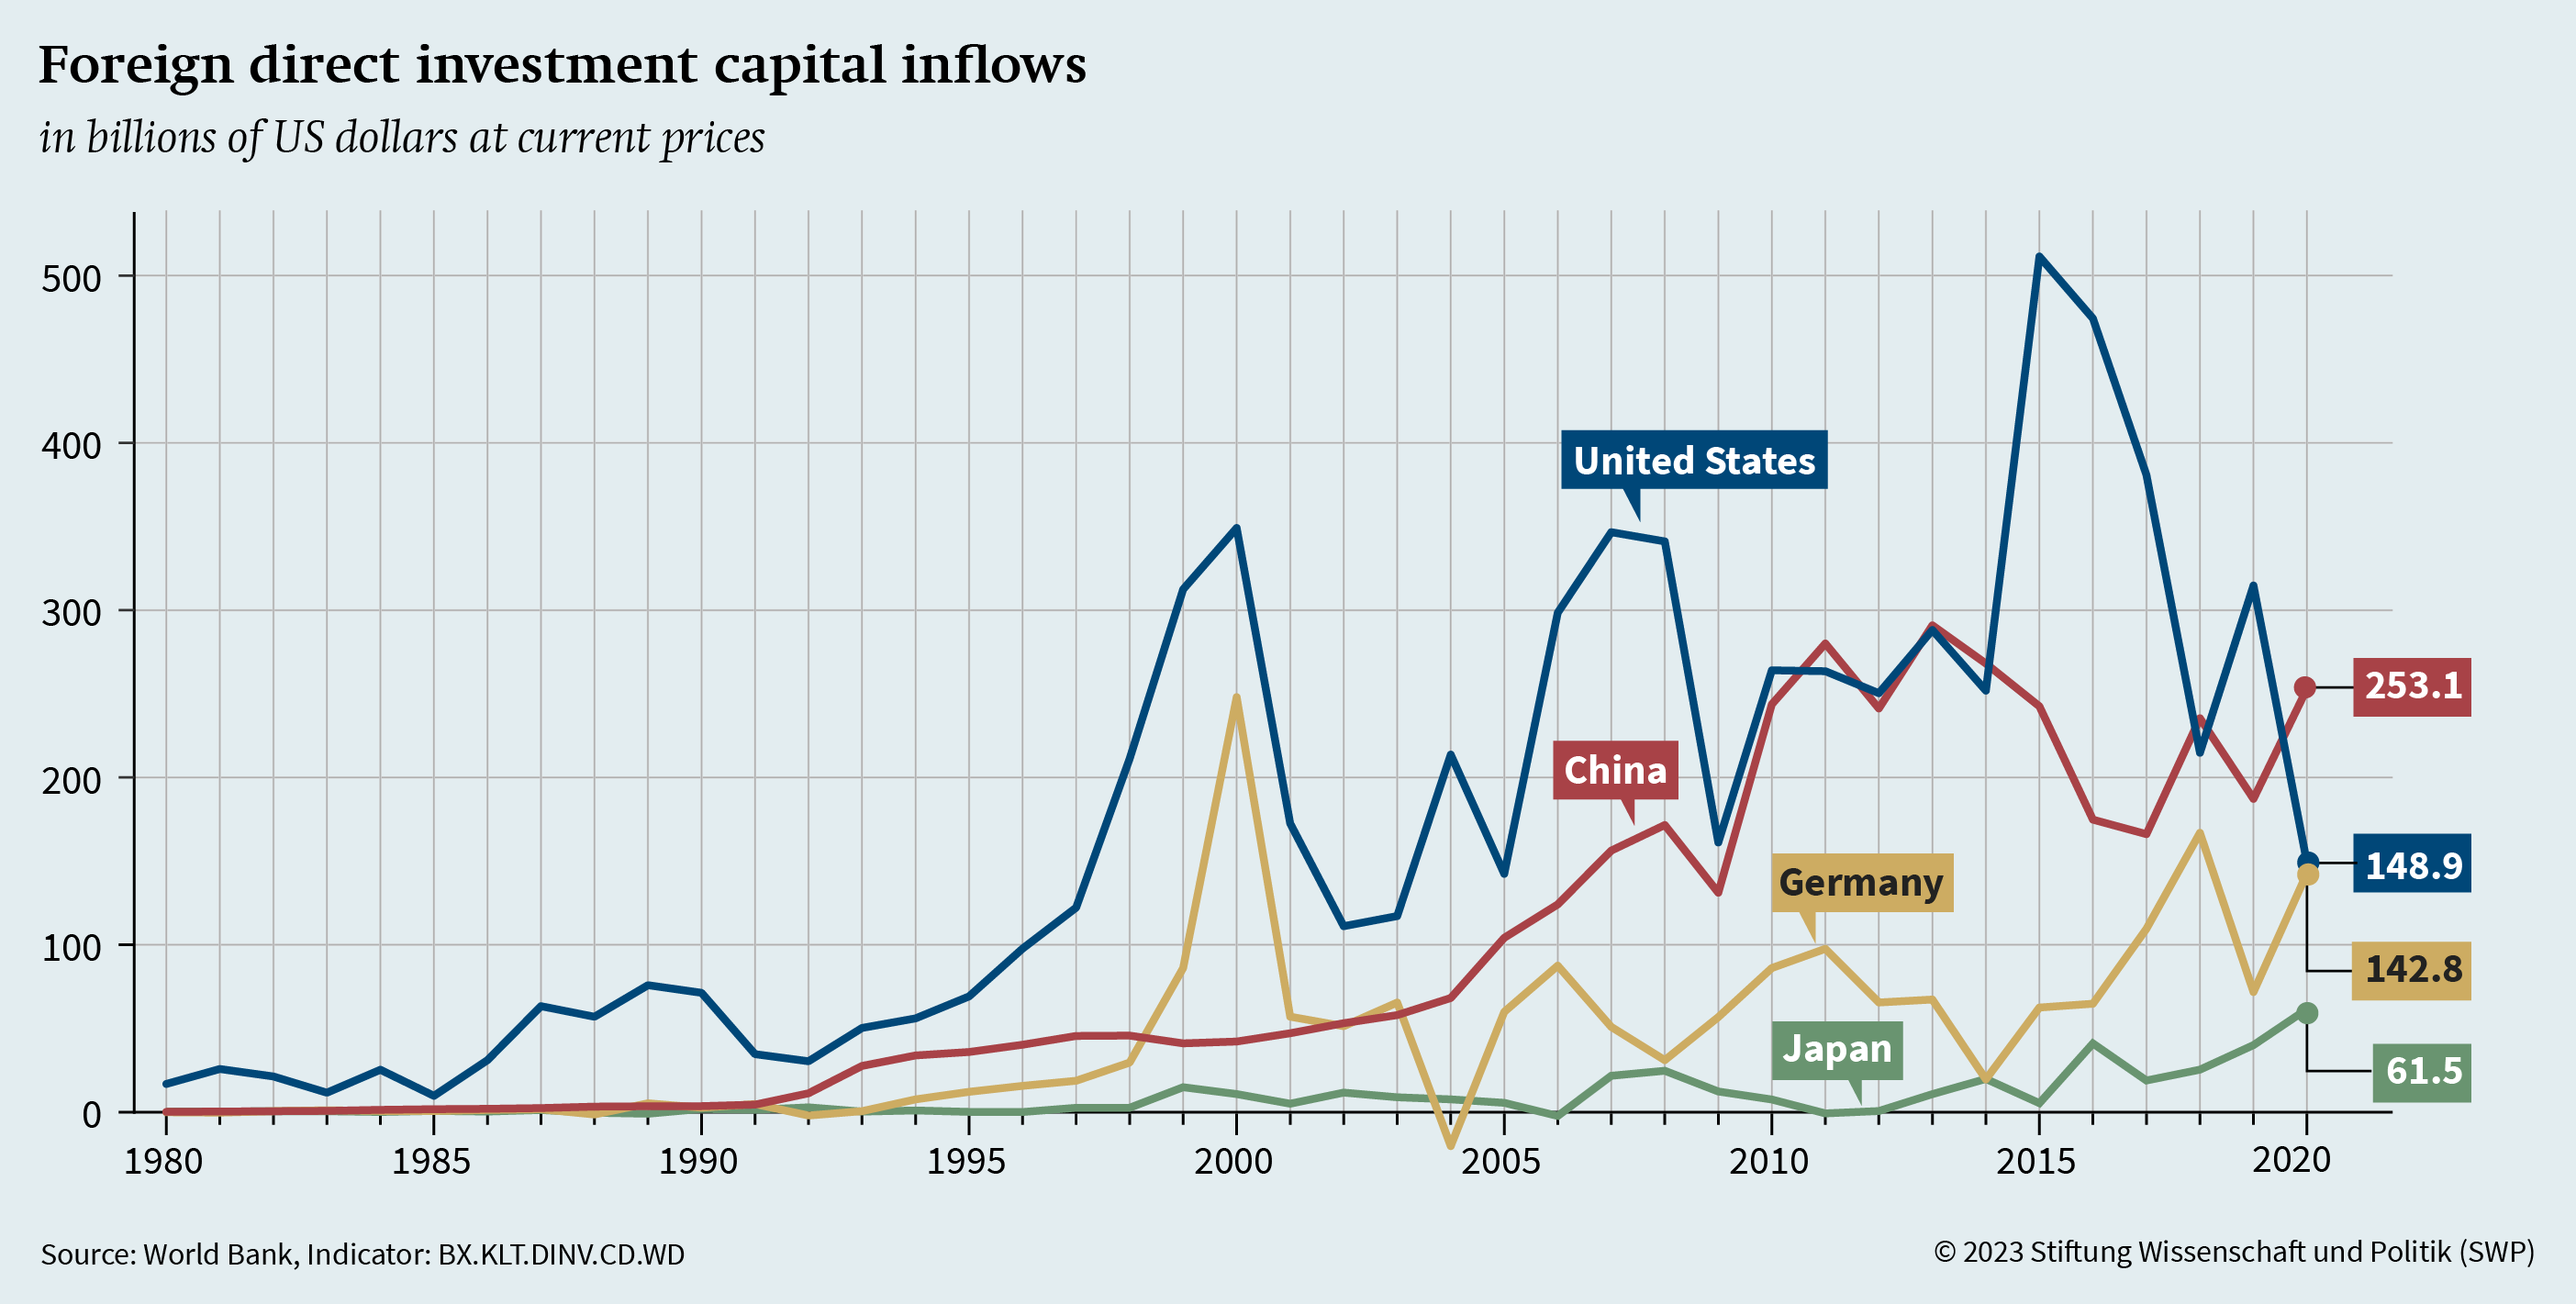 Figure 3: Foreign direct investment capital inflows